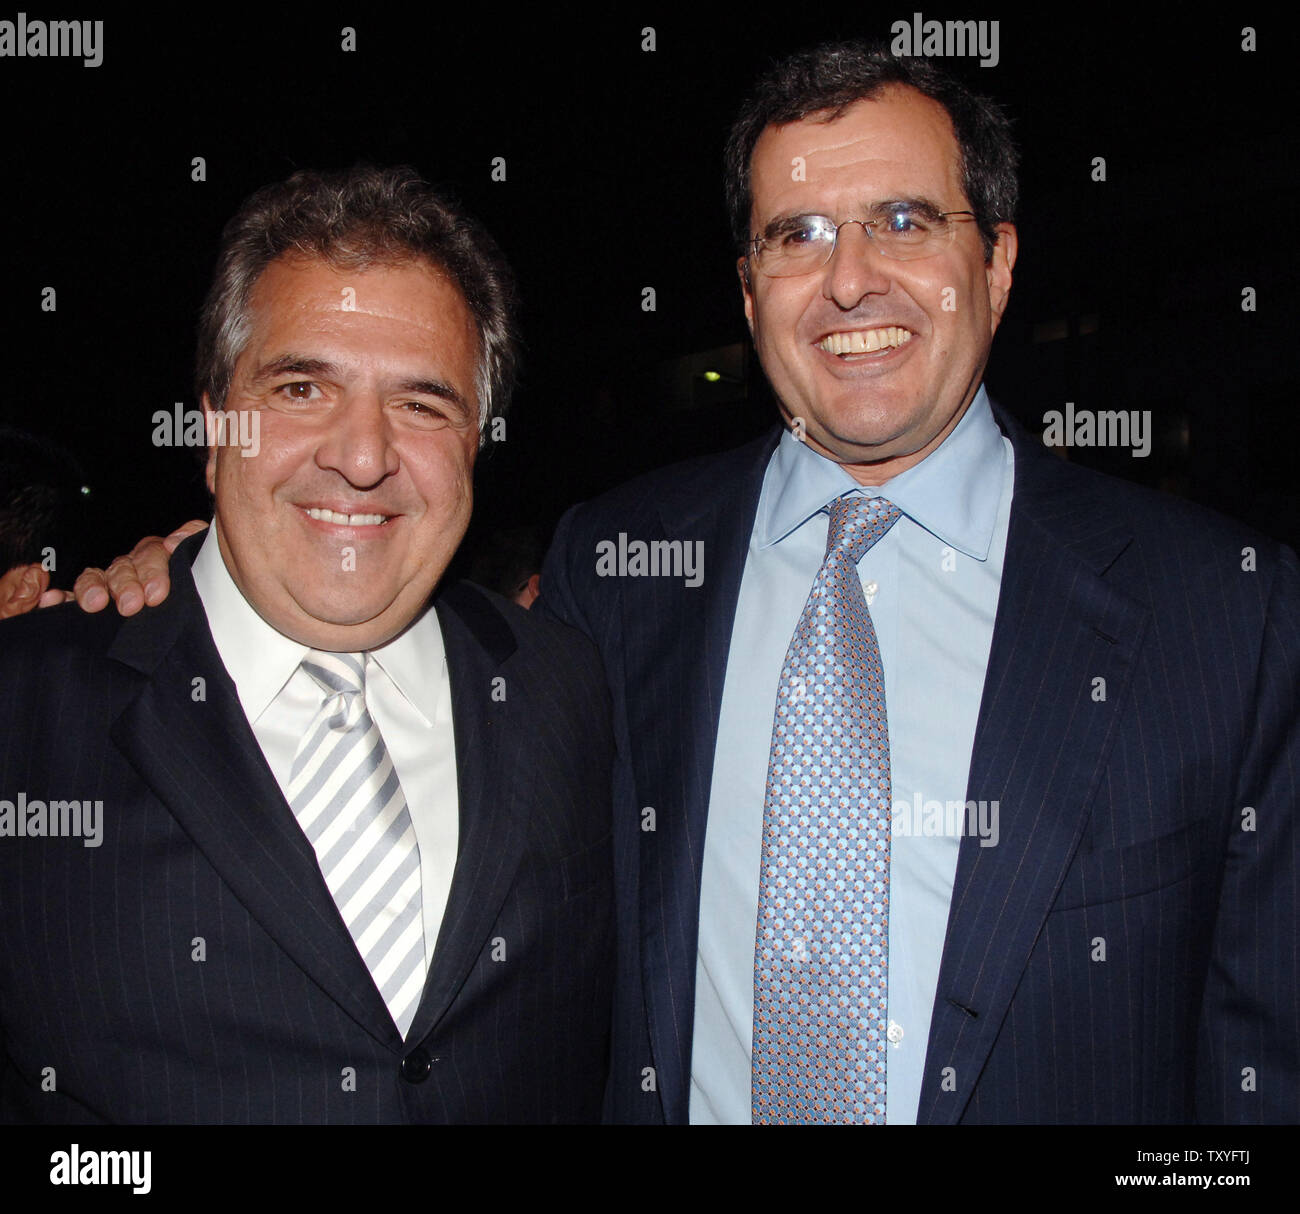 Peter Chernin (R), CEO of News Corporation and Jim Gianopulos, Chairman Fox Films Entertainment pose during the premiere of 'The Last King of Scotland' at the Academy of Motion Picture Arts & Sciences in Beverly Hills, California on September 21, 2006. The movie is based on the events of the brutal dictator Idi Amin's regime as seen by his personal physician during the 1970s. (UPI Photo/Jim Ruymen) Stock Photo